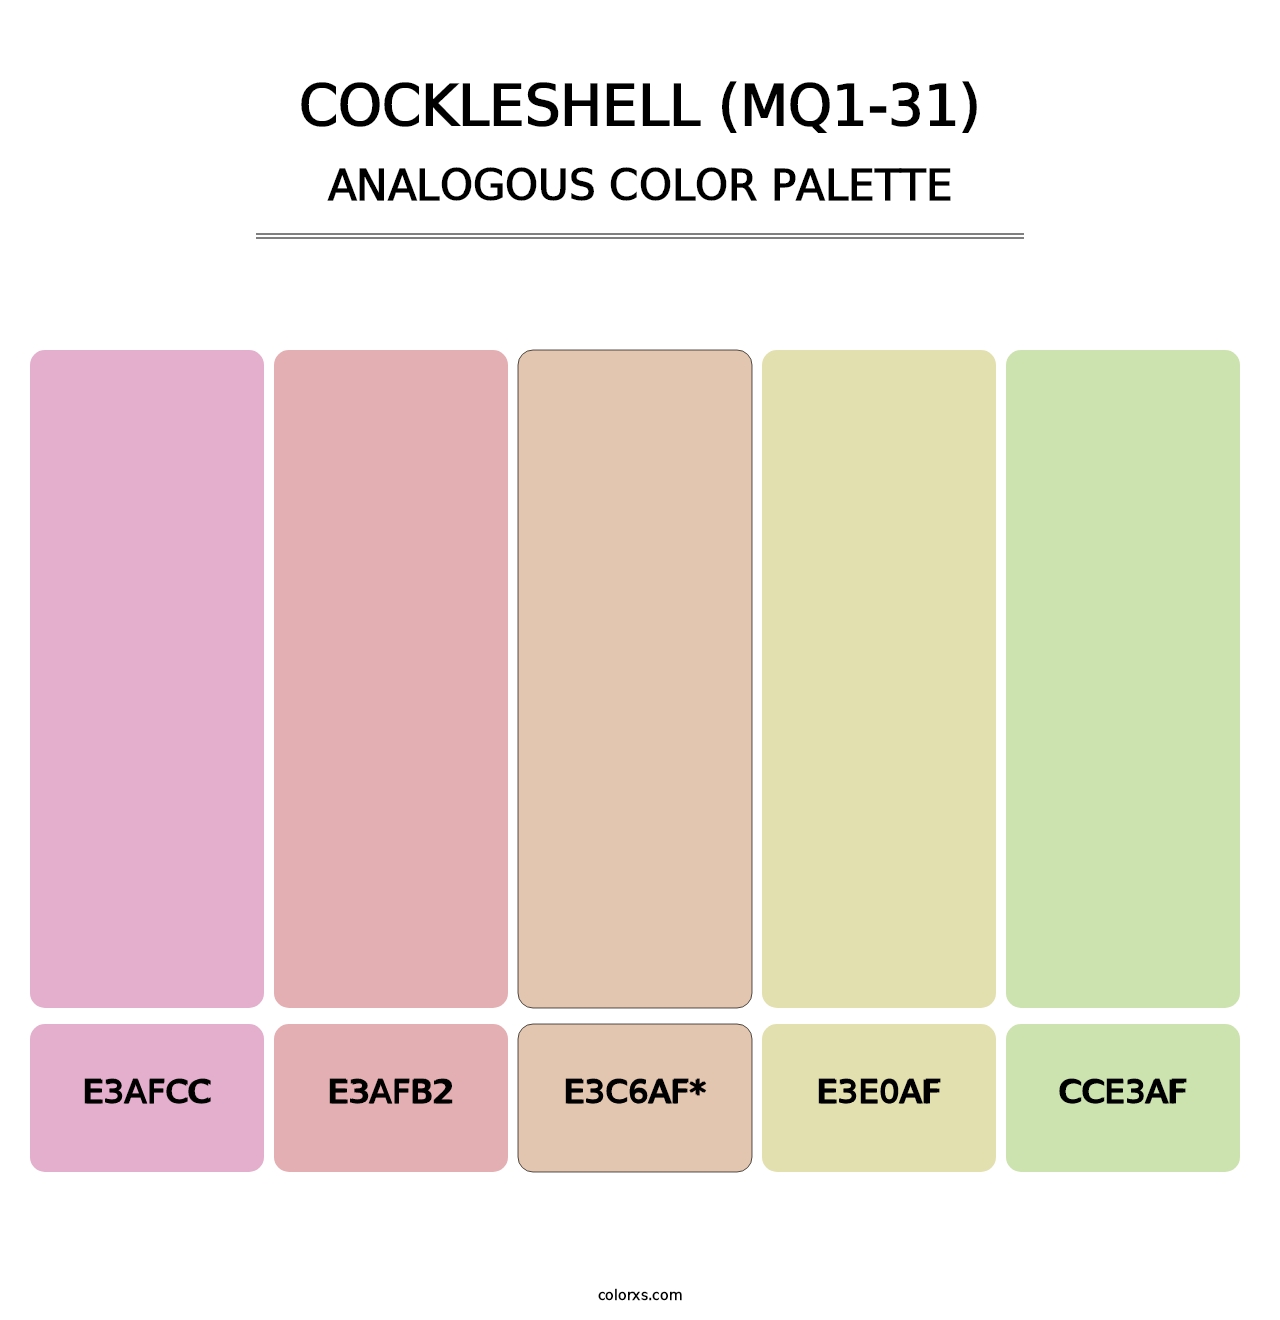 Cockleshell (MQ1-31) - Analogous Color Palette